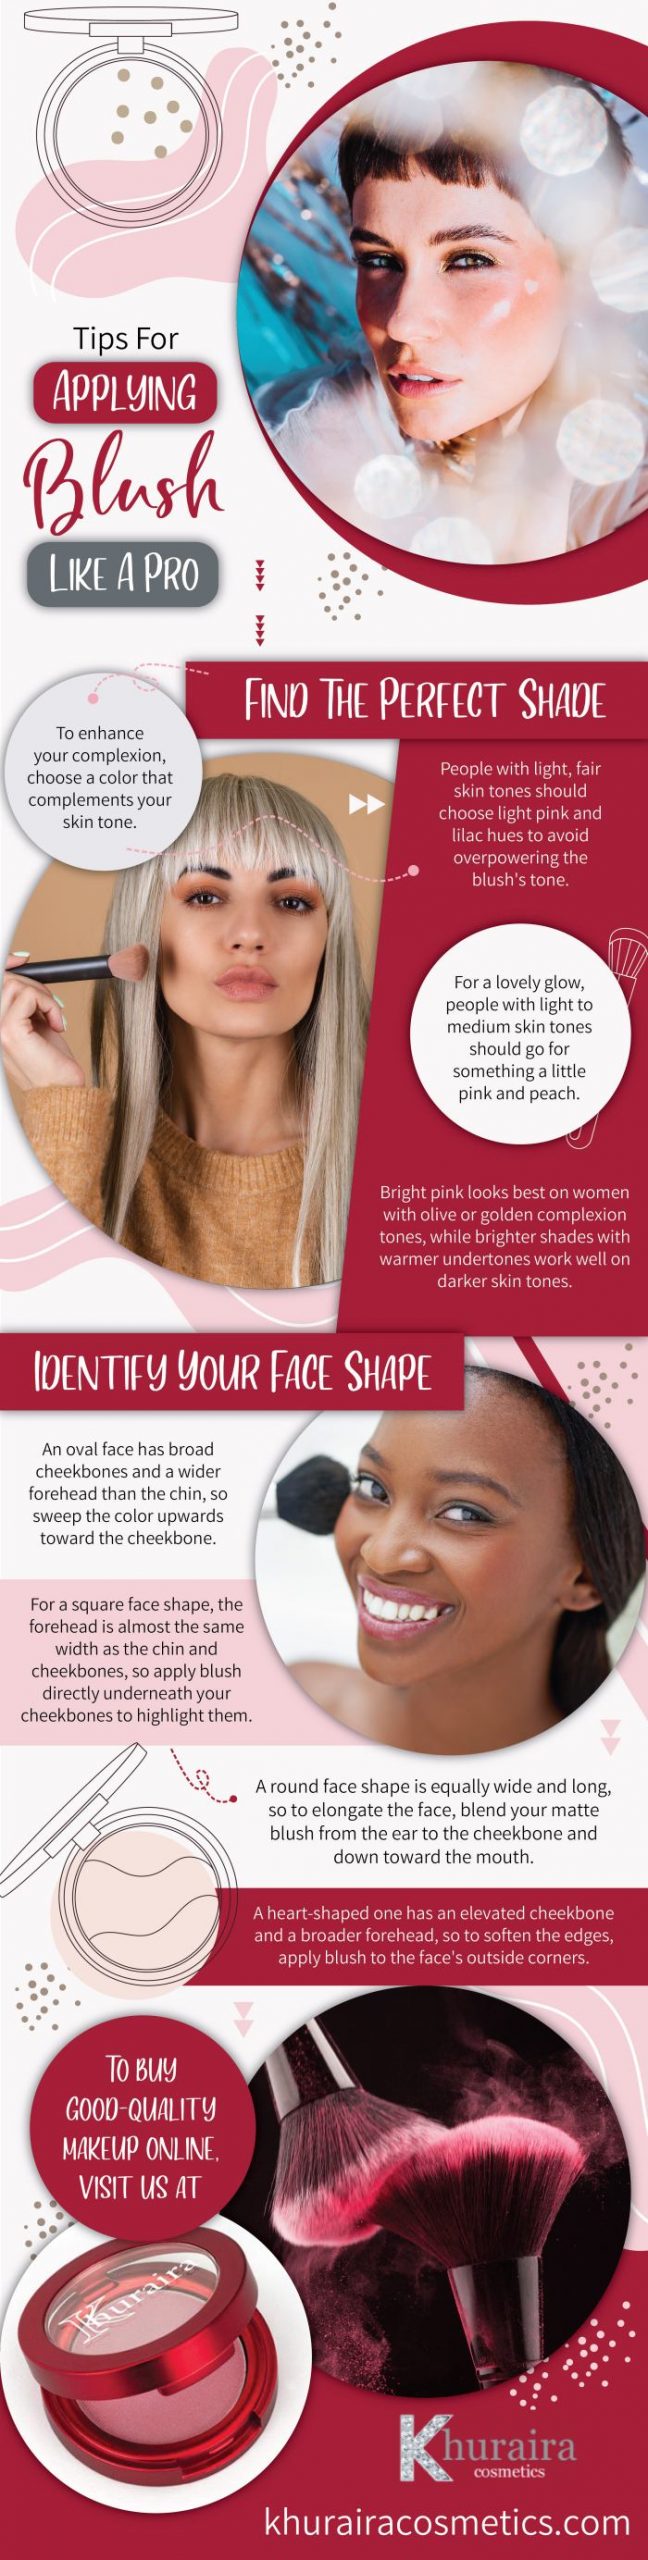 Tips For Applying Blush Like A Pro